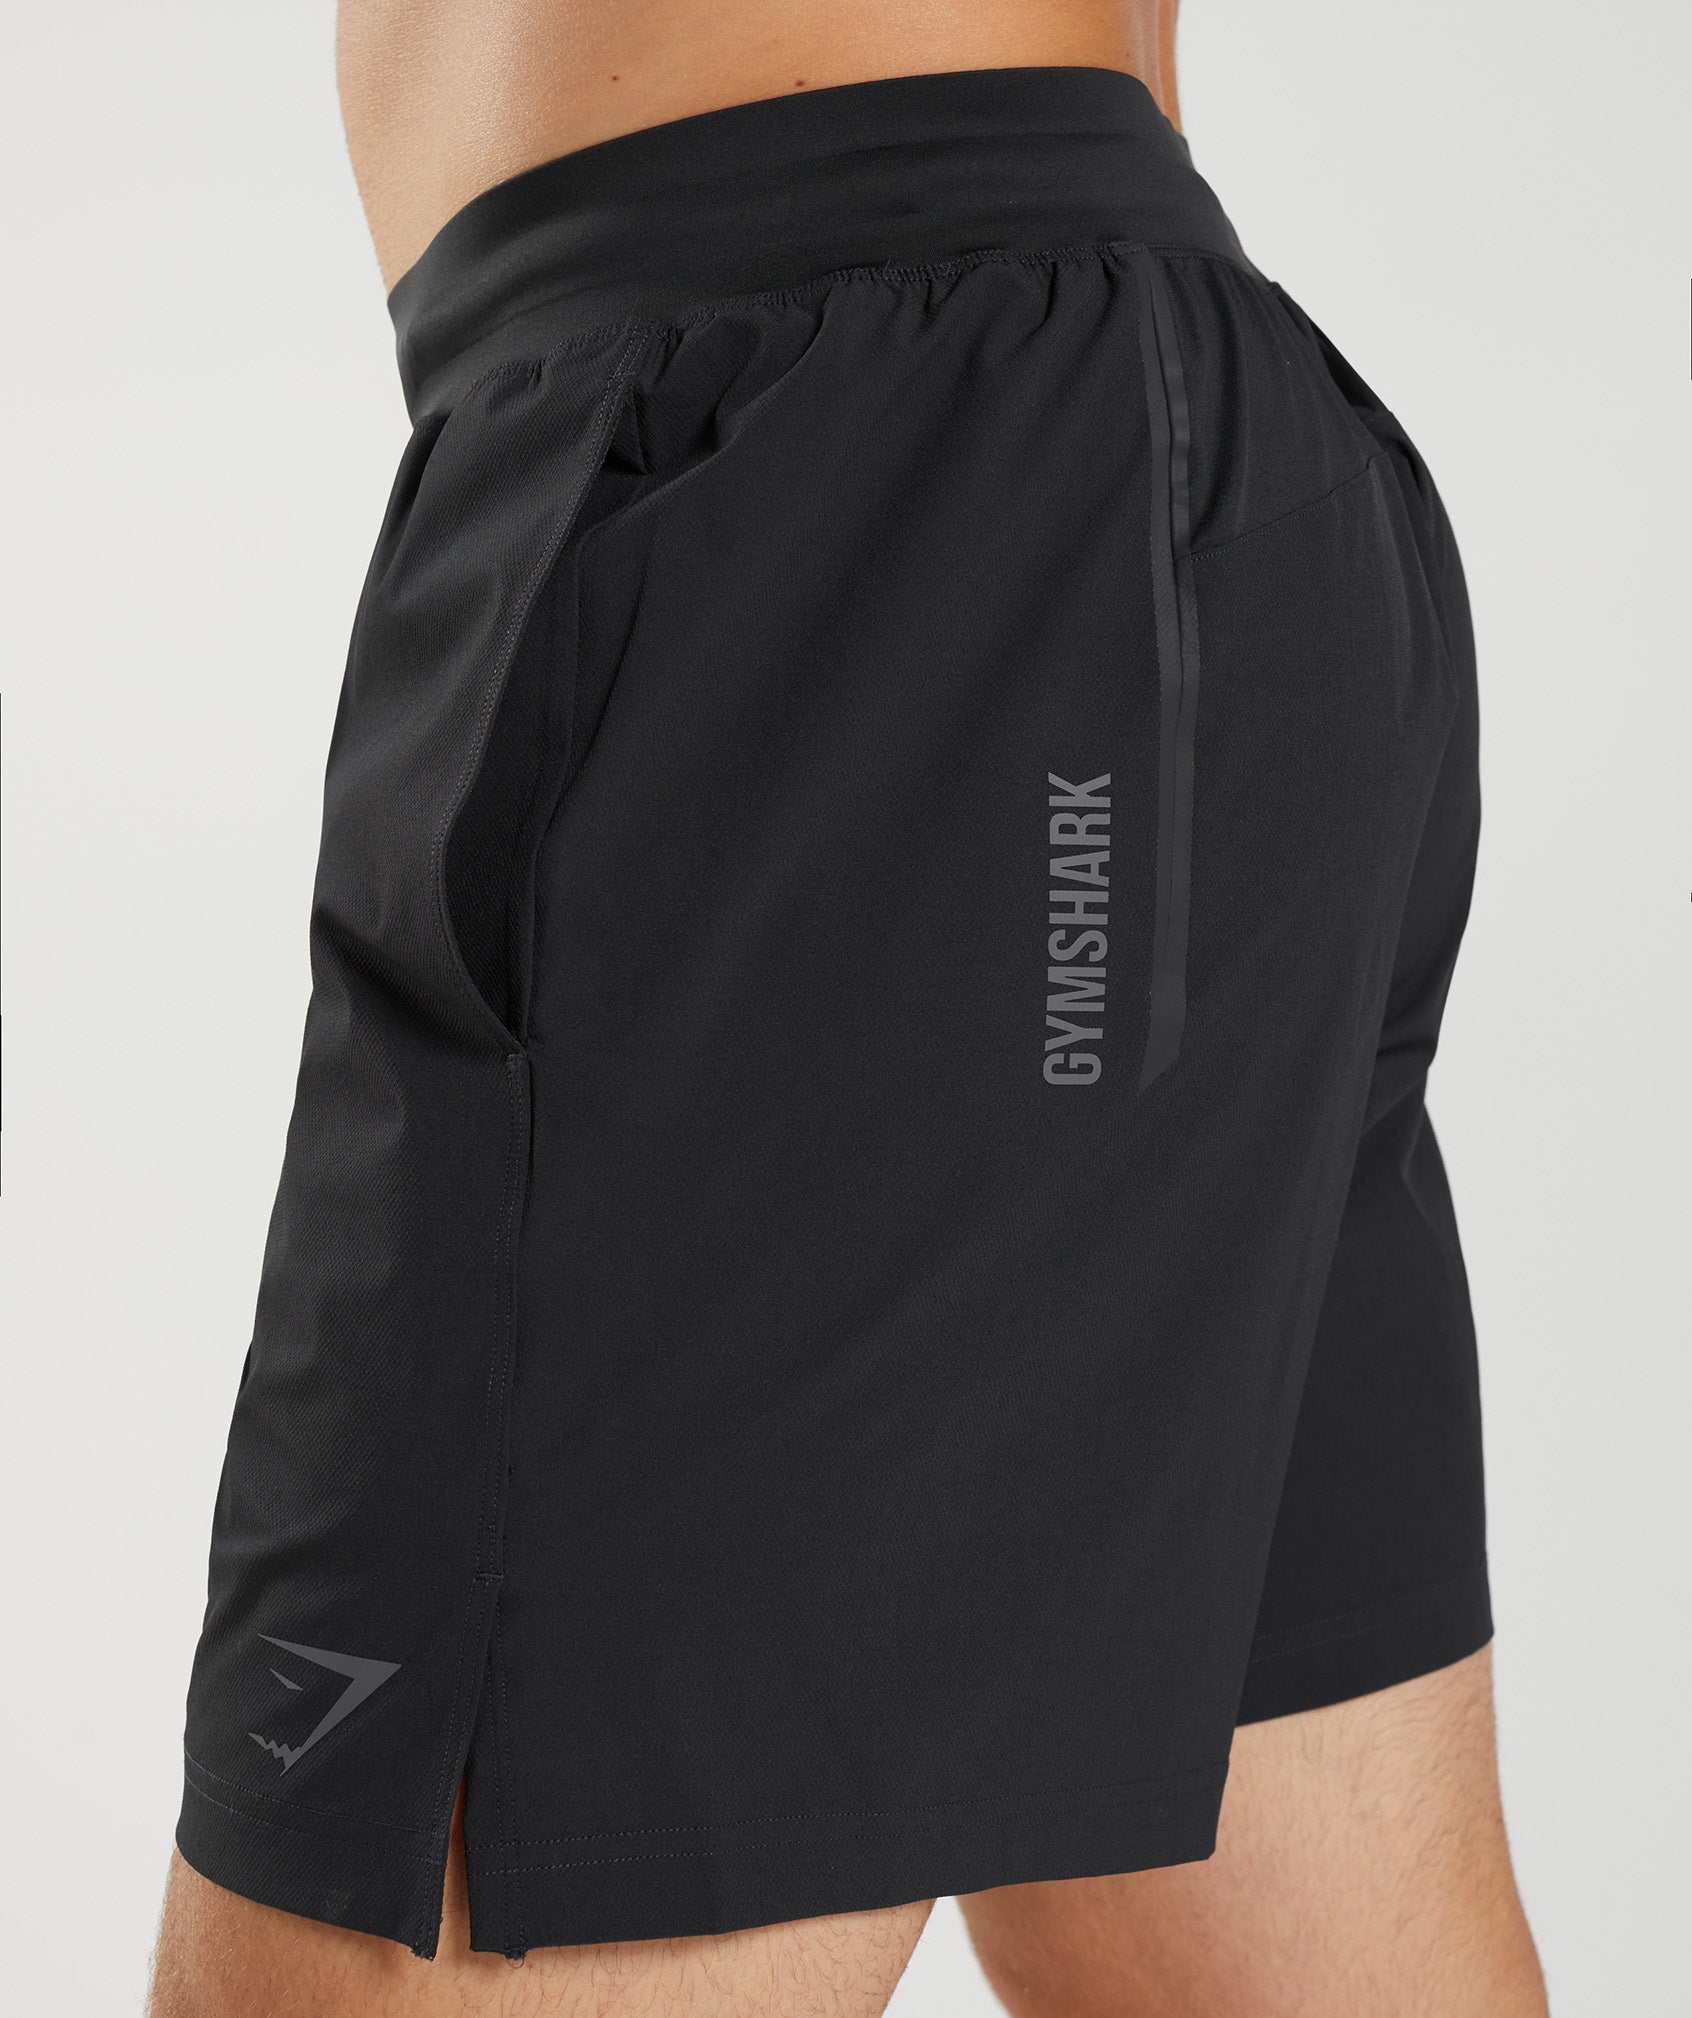 Apex 8" Function Shorts in Black - view 6